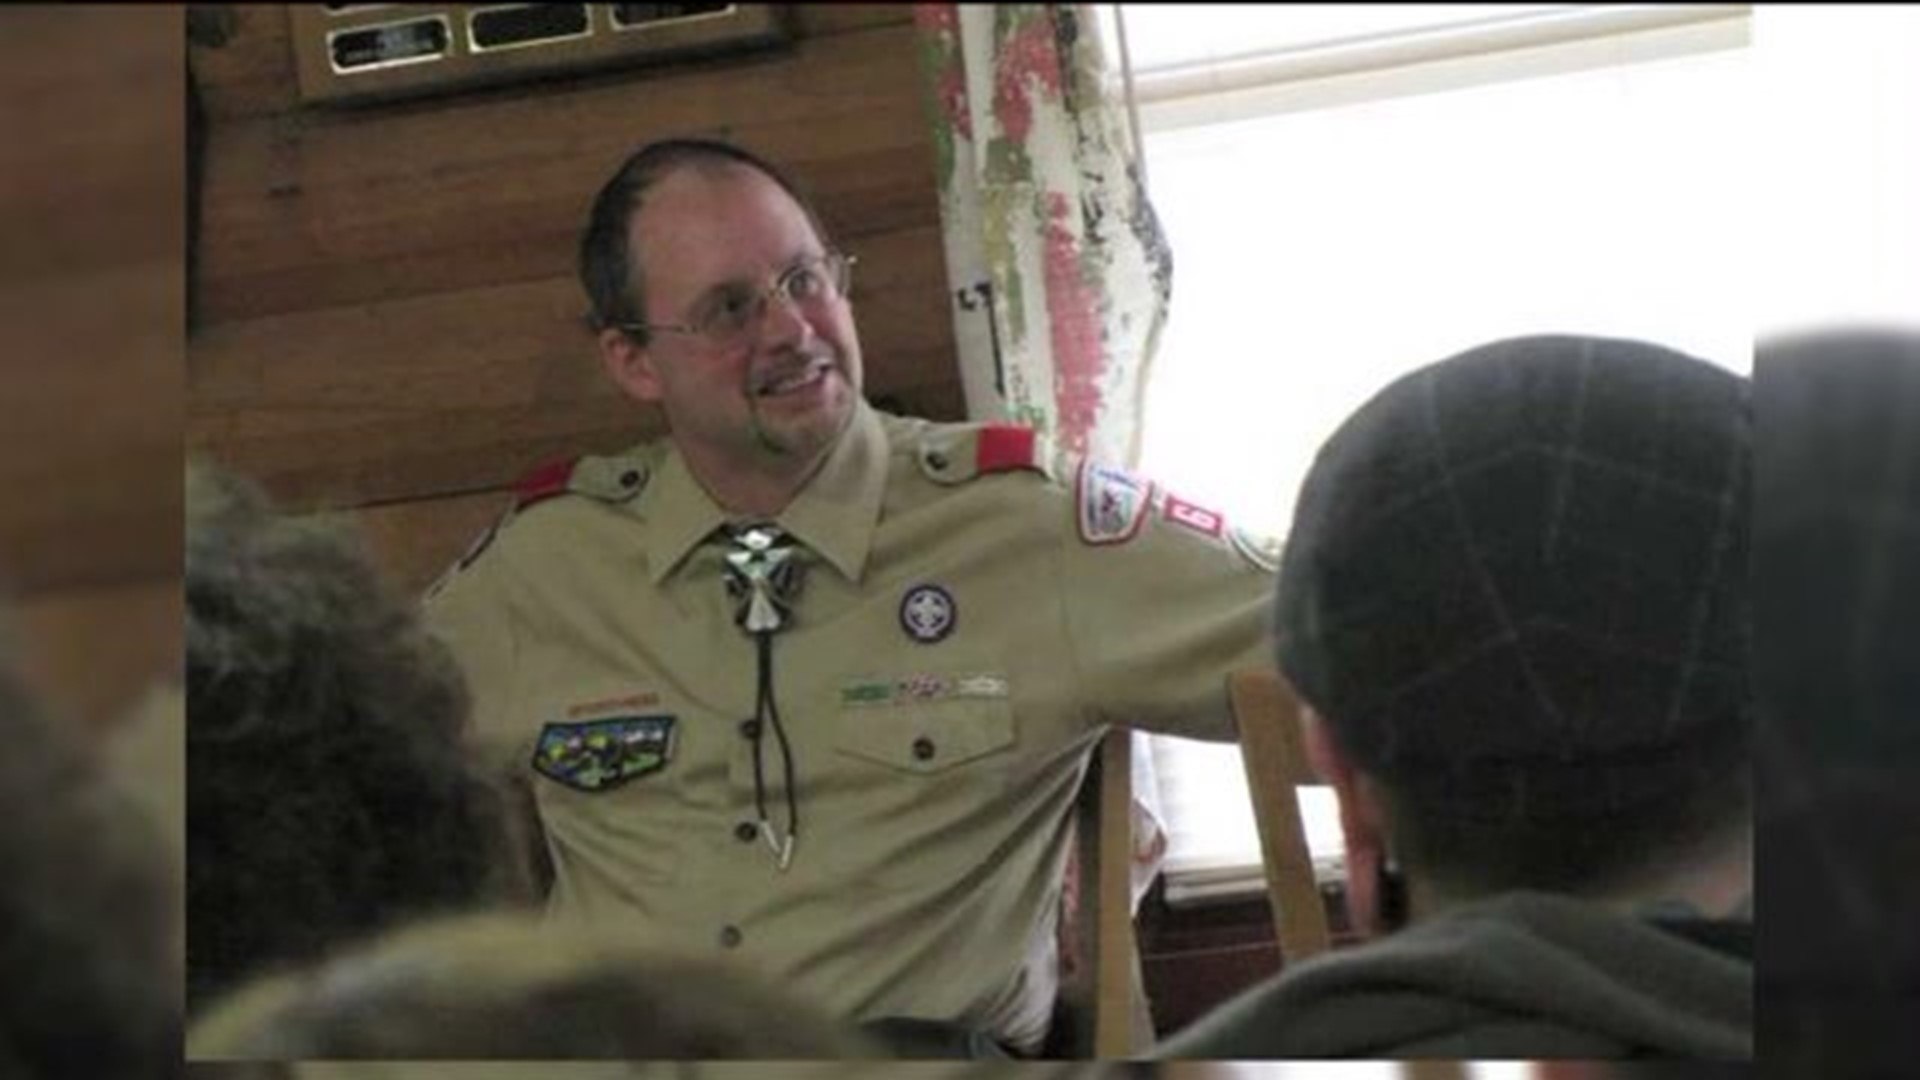 Boy Scouts troop leader arrested on sexual assault charges